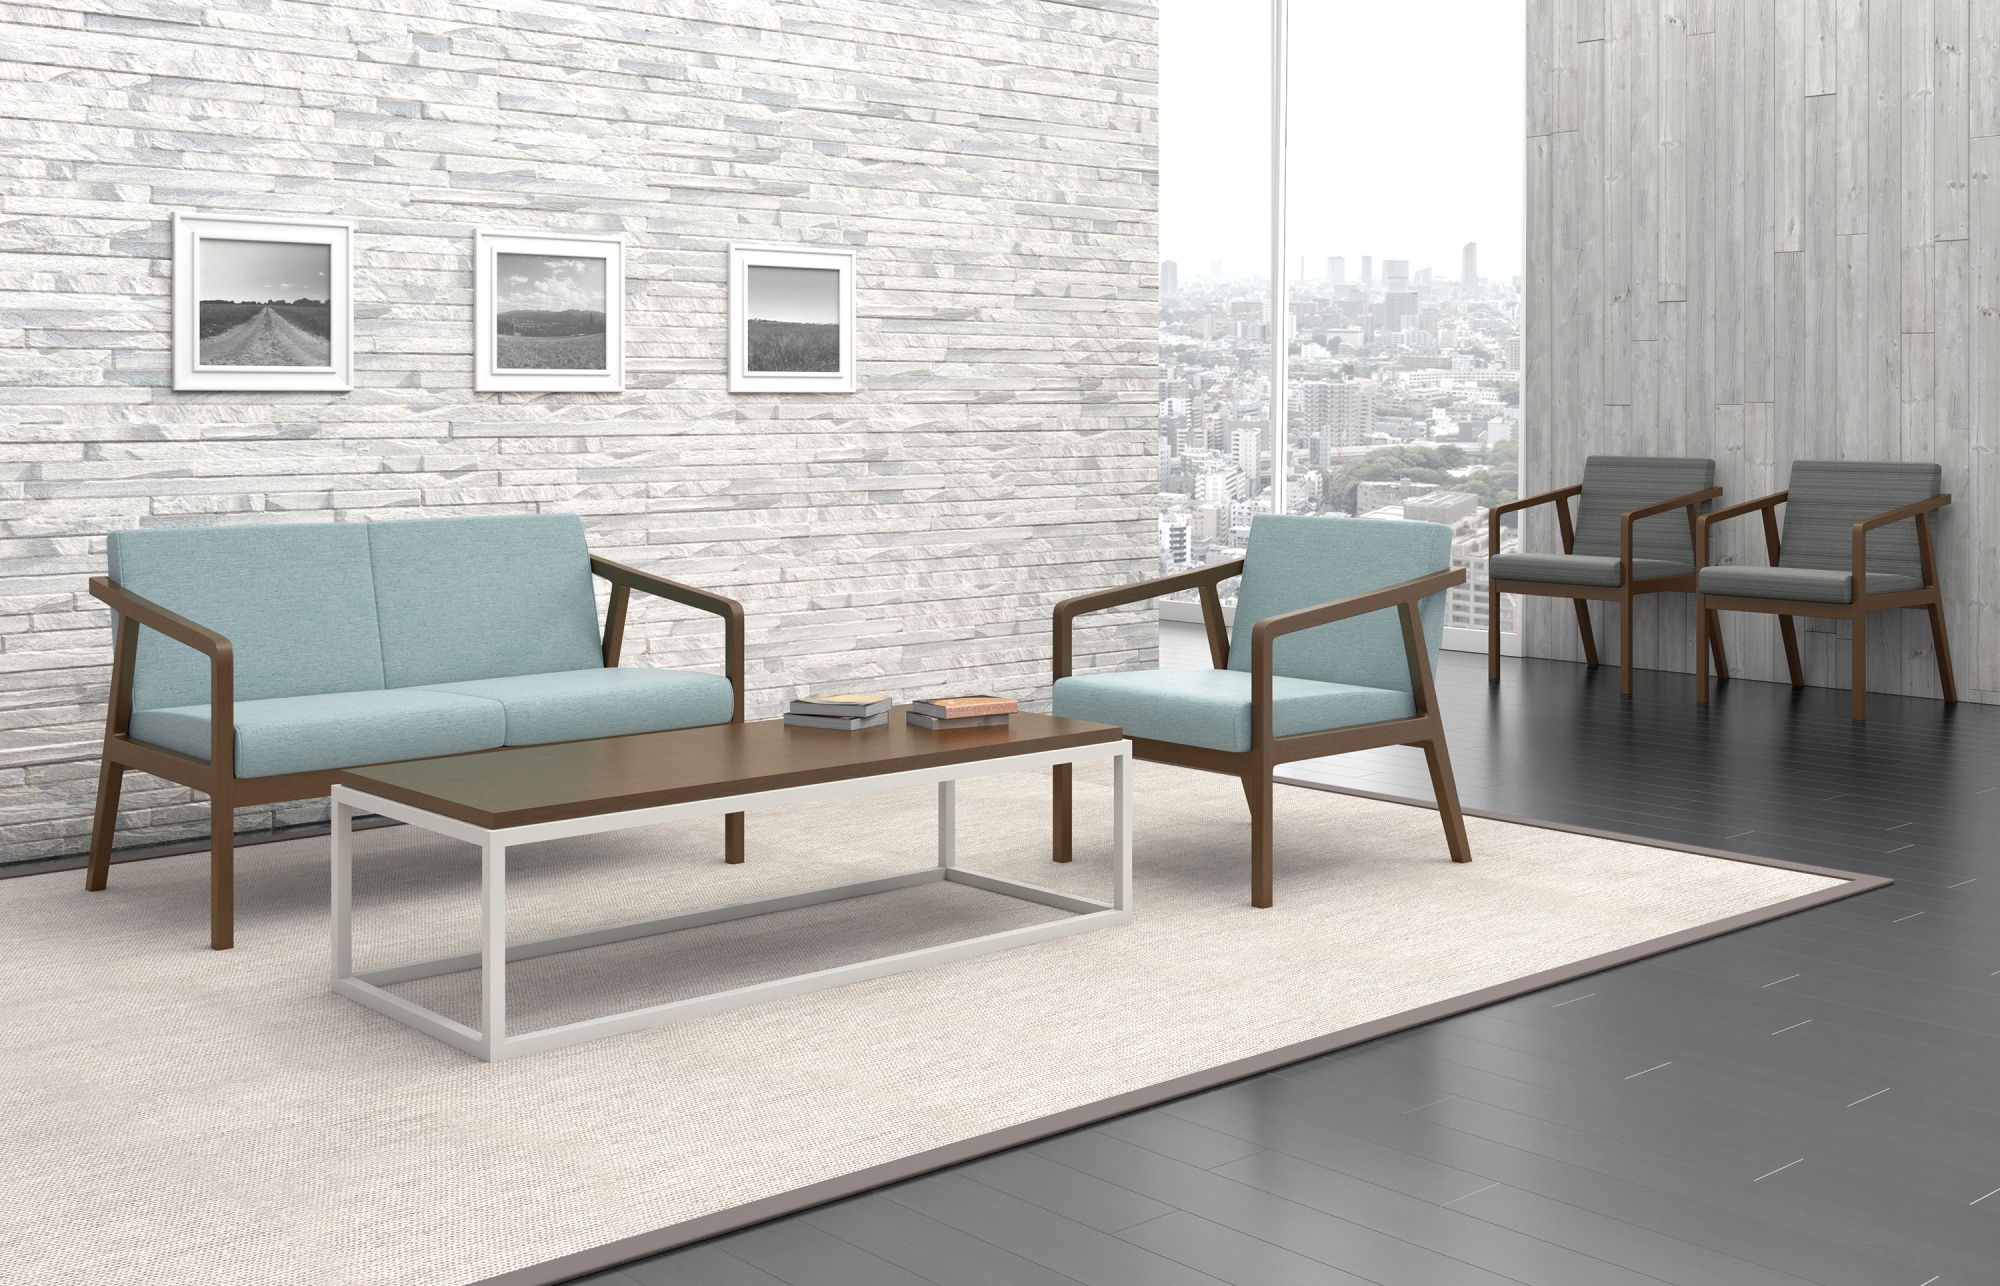 Indiana Furniture, Seating, The Britta Collection showcases a mid-century Scandinavian aesthetic with an appealing